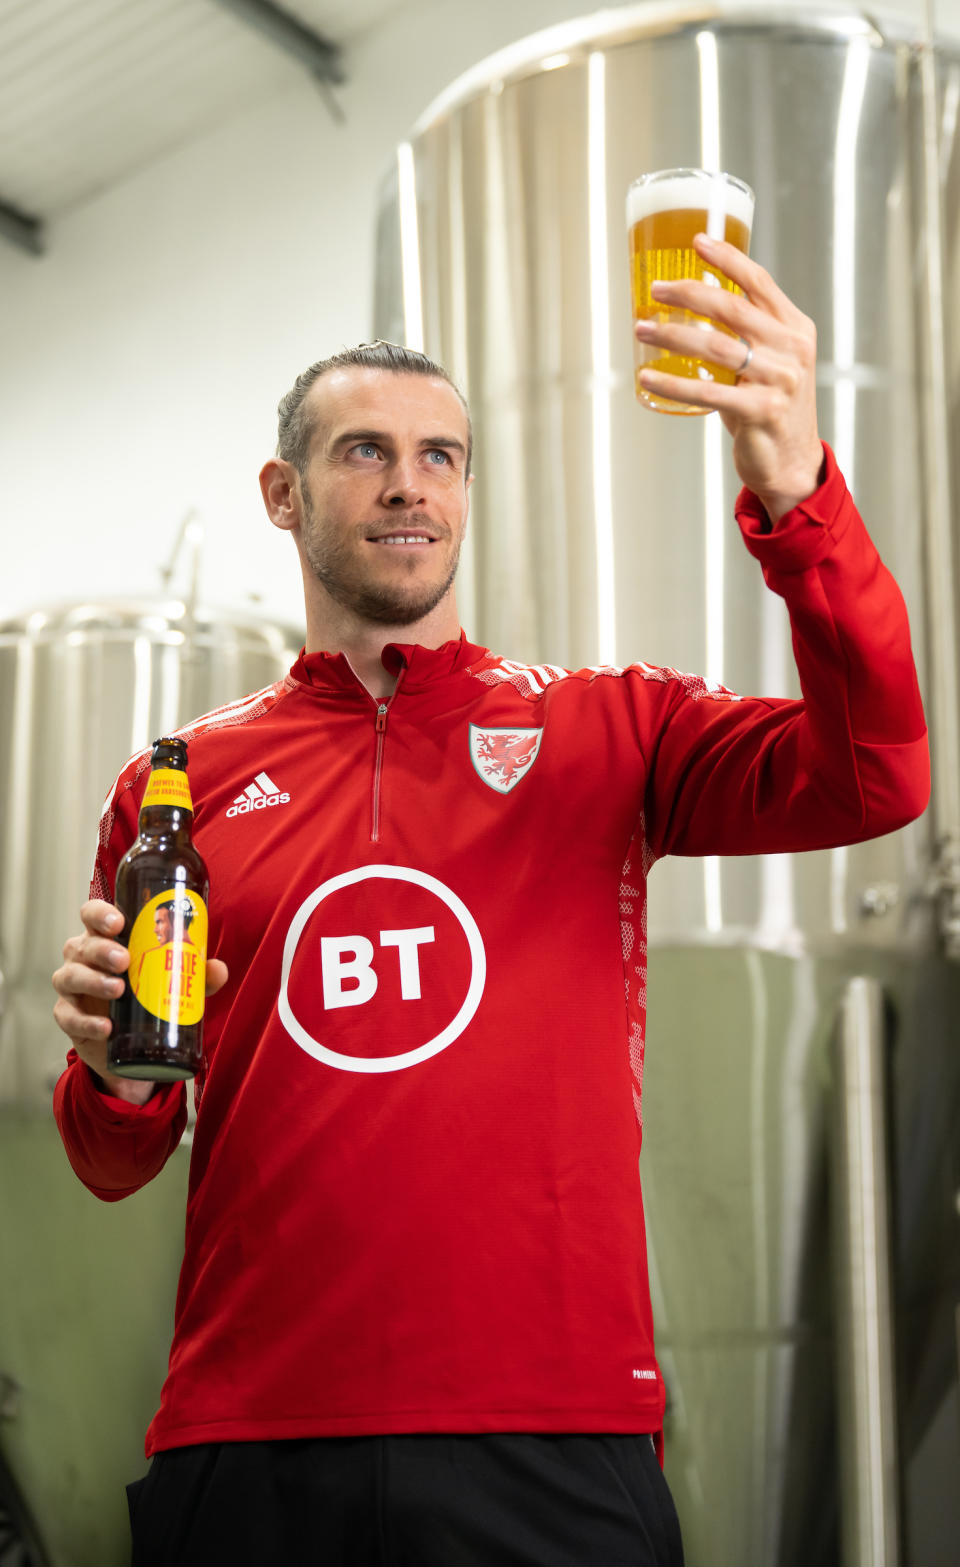 Bale sampling some of his own Bale Ale at the Glamorgan Brewery Company near Cardiff (Matt Horwood/Tesco)